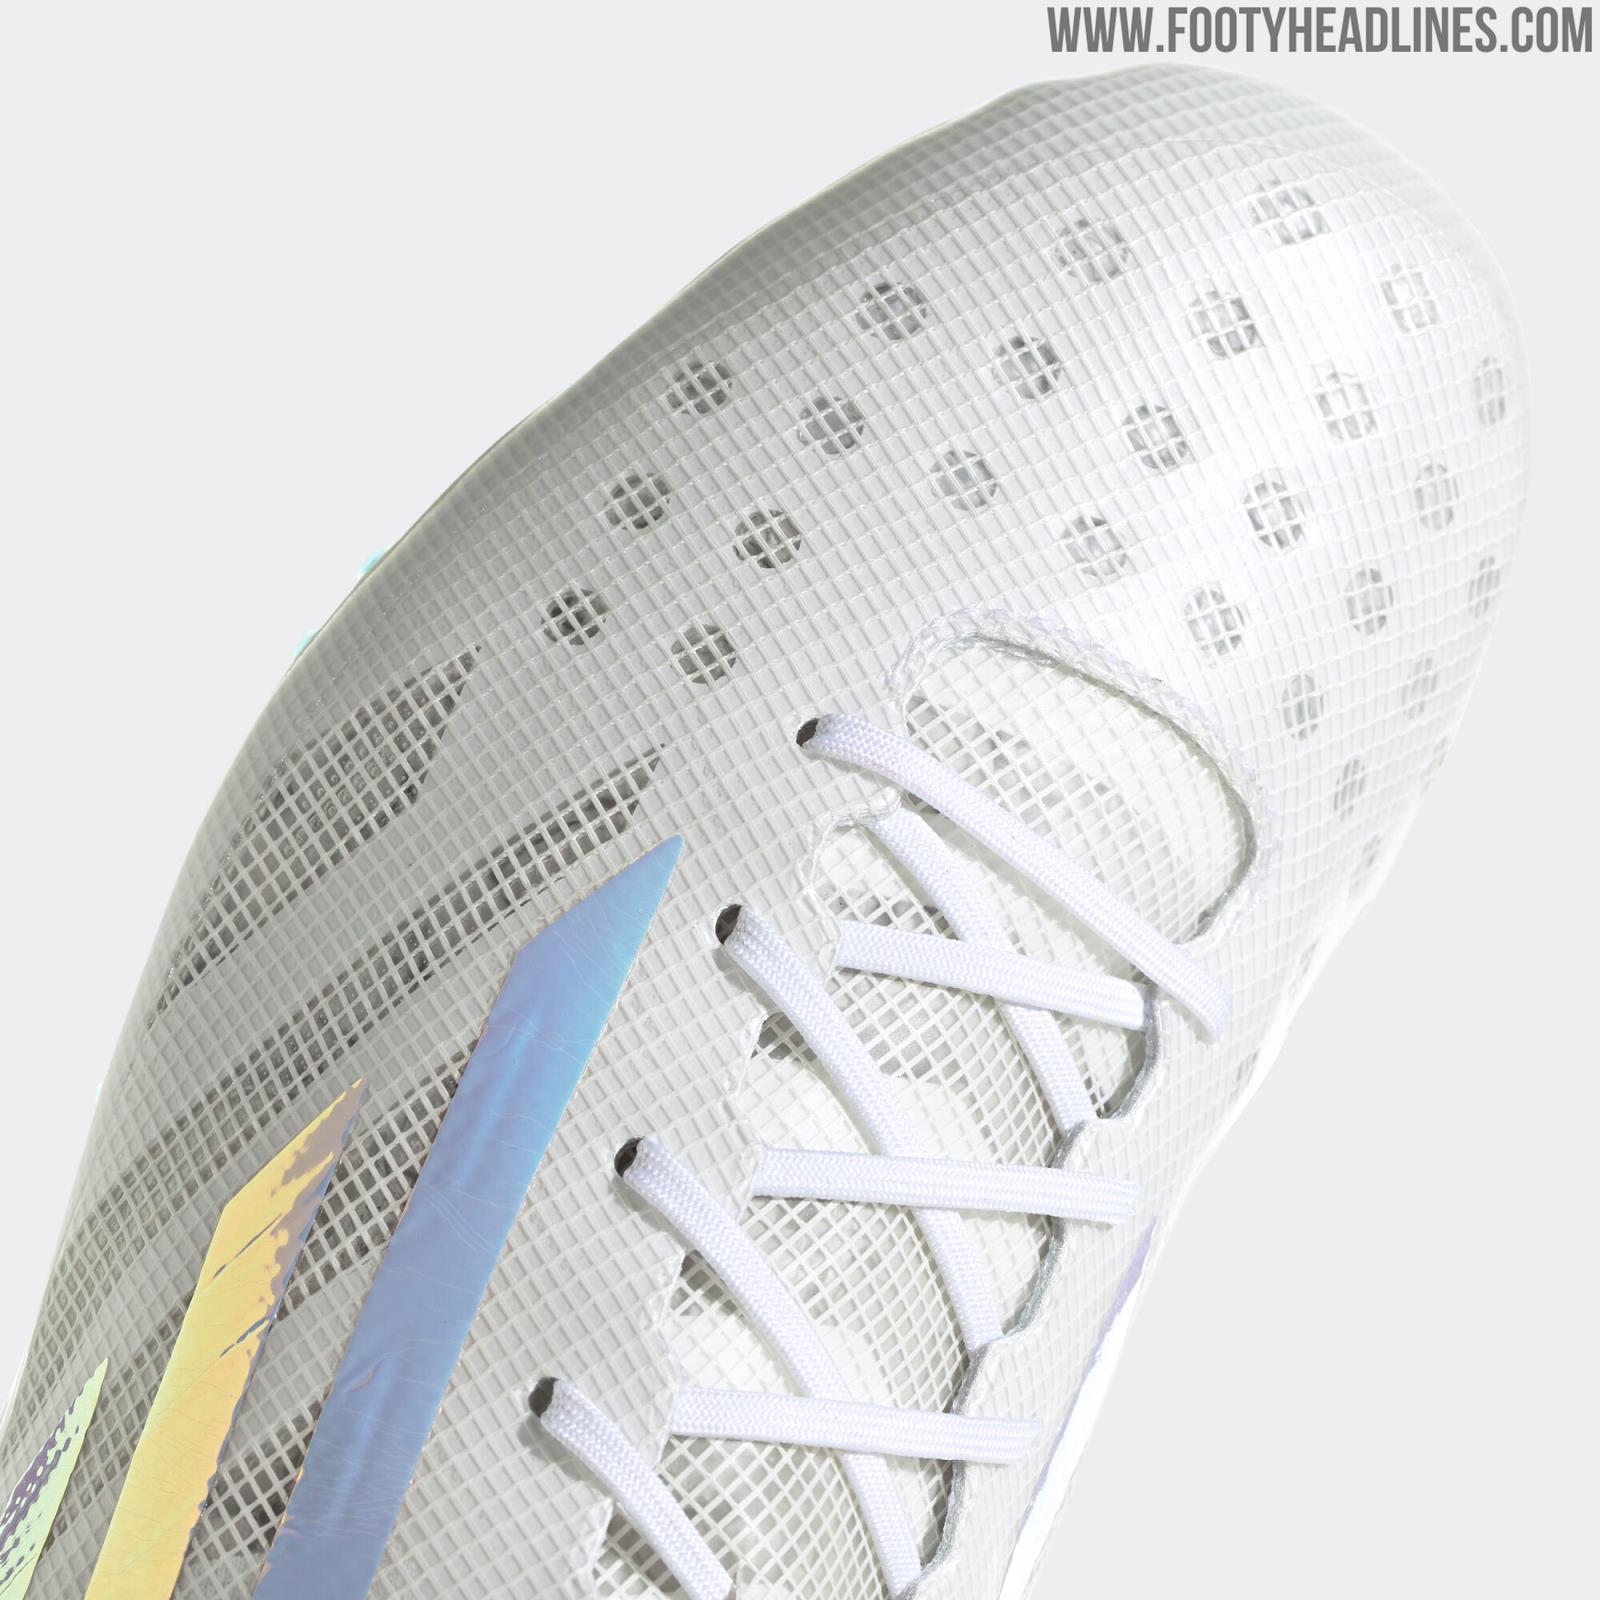 Limited-Edition Adidas X 99.1 Boots Revealed - Footy Headlines